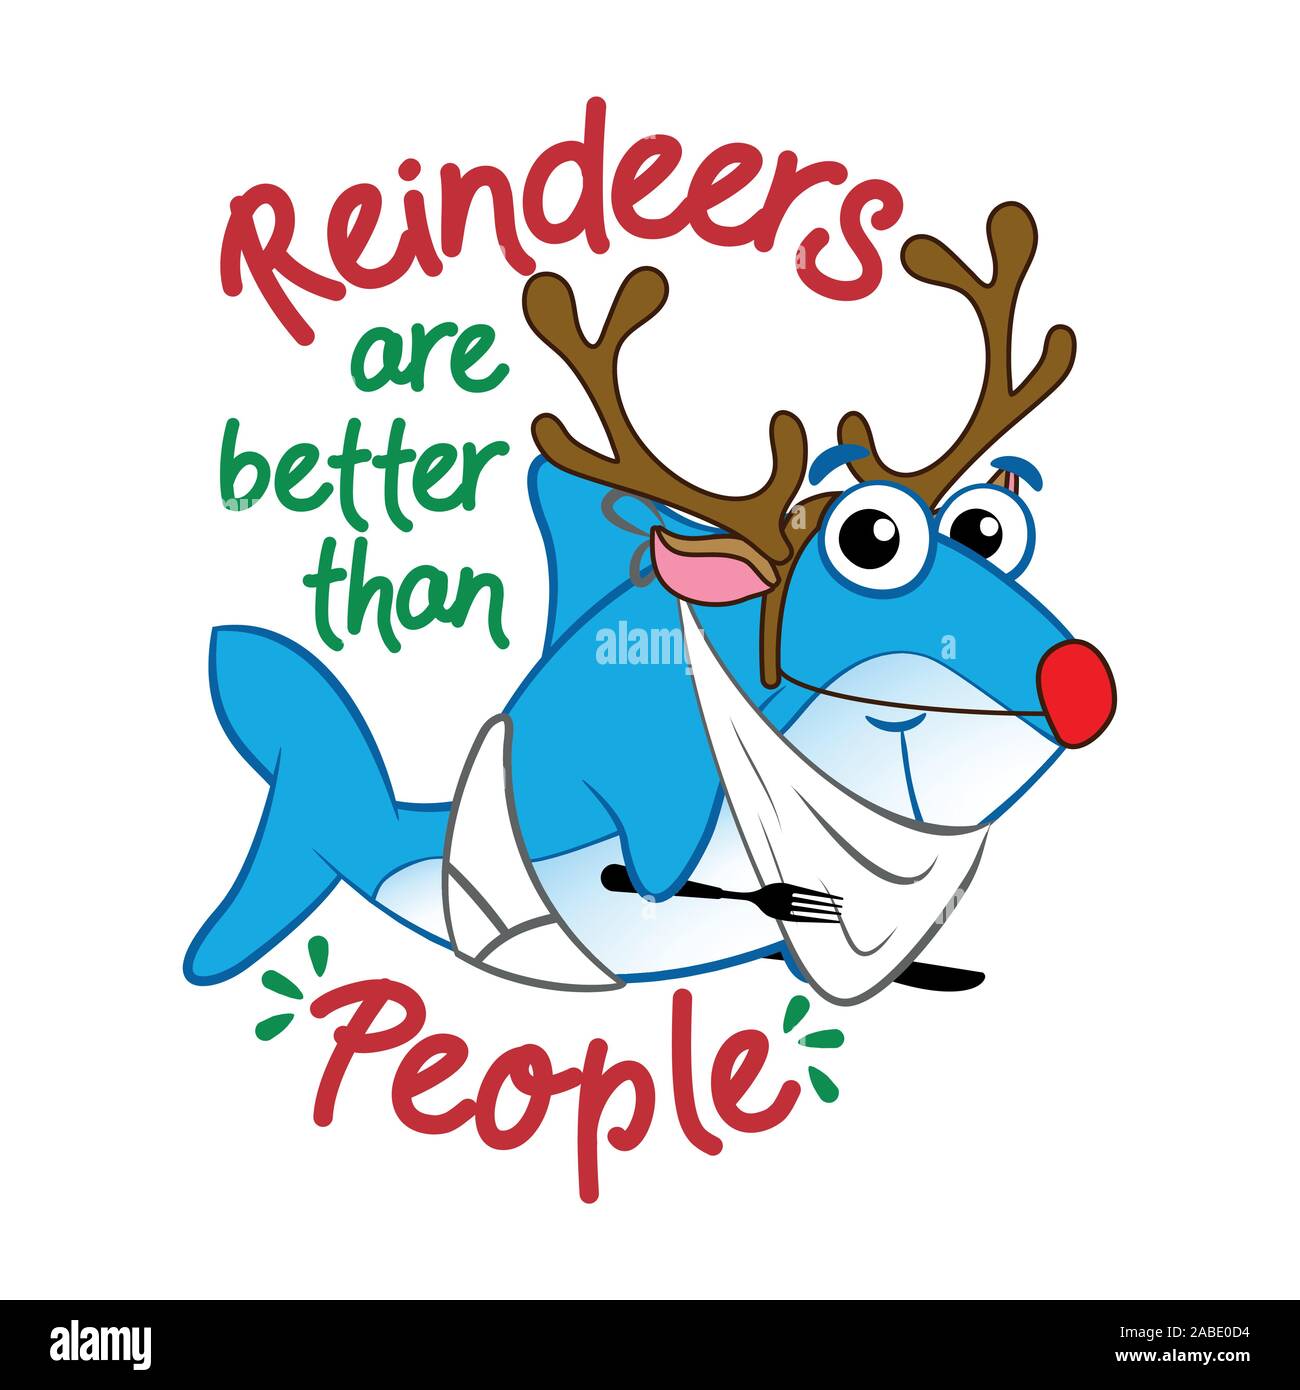 Reindeers are better than people. - T-Shirts, Hoodie, Tank, gifts. Vector illustration text for Christmas. Inspirational quote card, invitation, banne Stock Vector